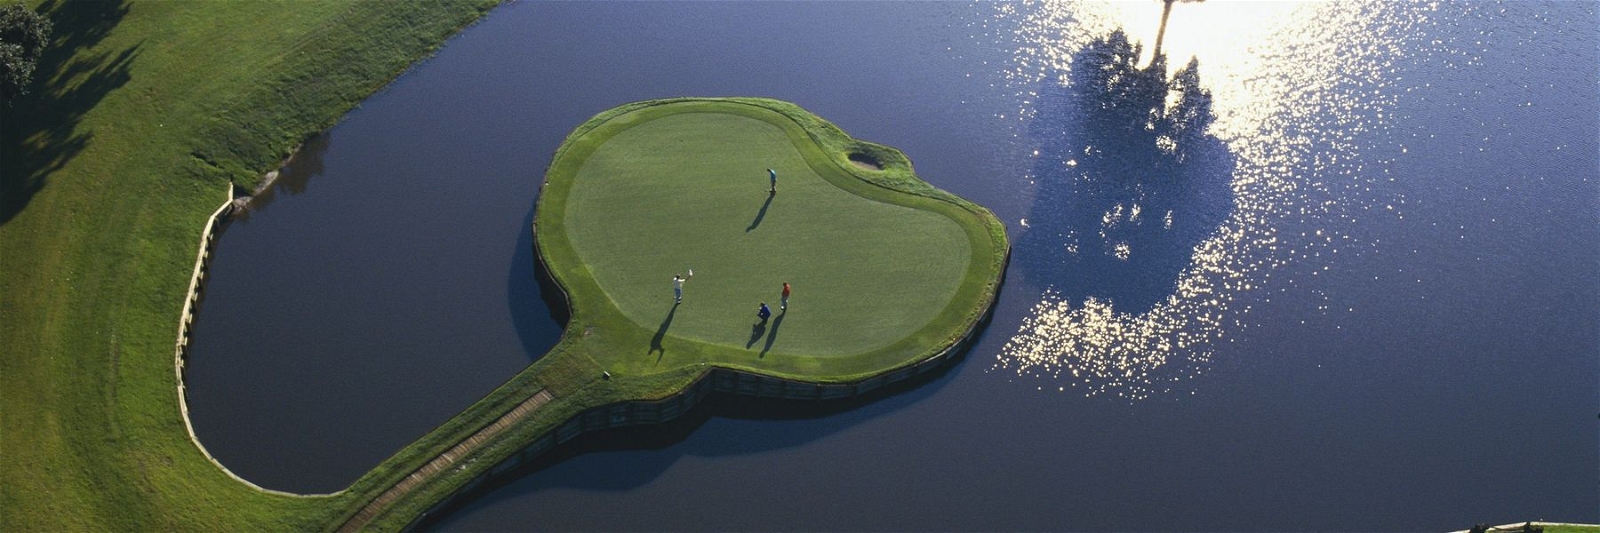 Golf Vacation Package - TPC Sawgrass Resort & PLAYERS Stadium Course from $535 per person, per day!